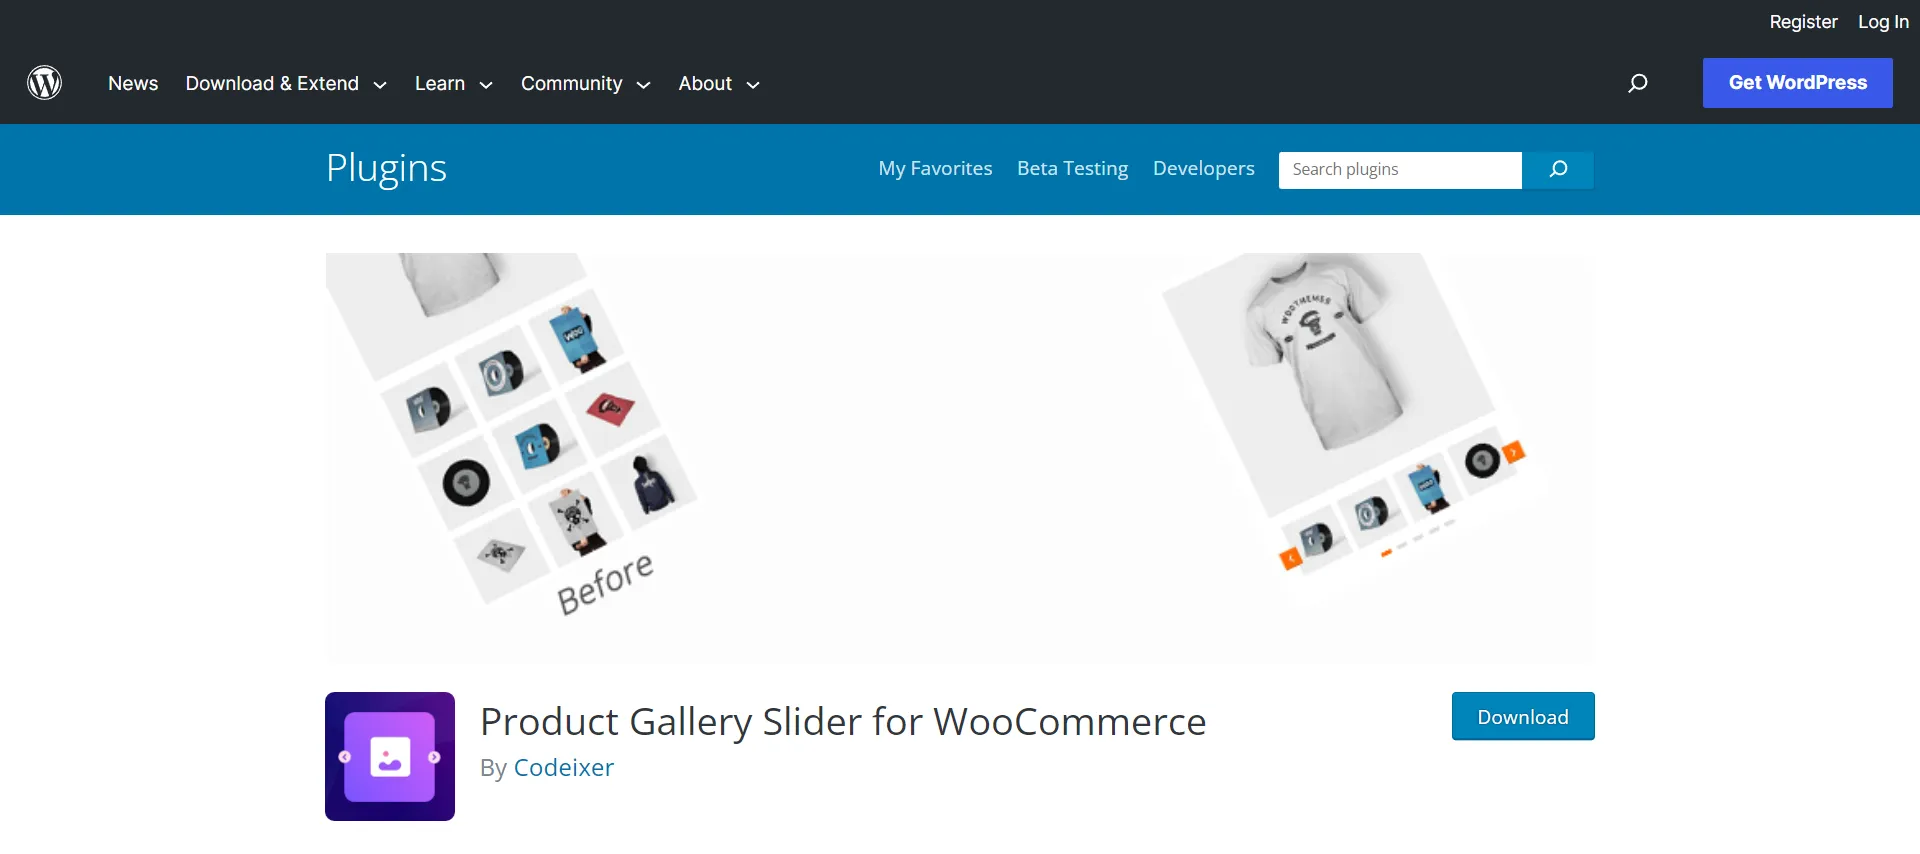 Product Gallery Slider for WooCommerce Plugin